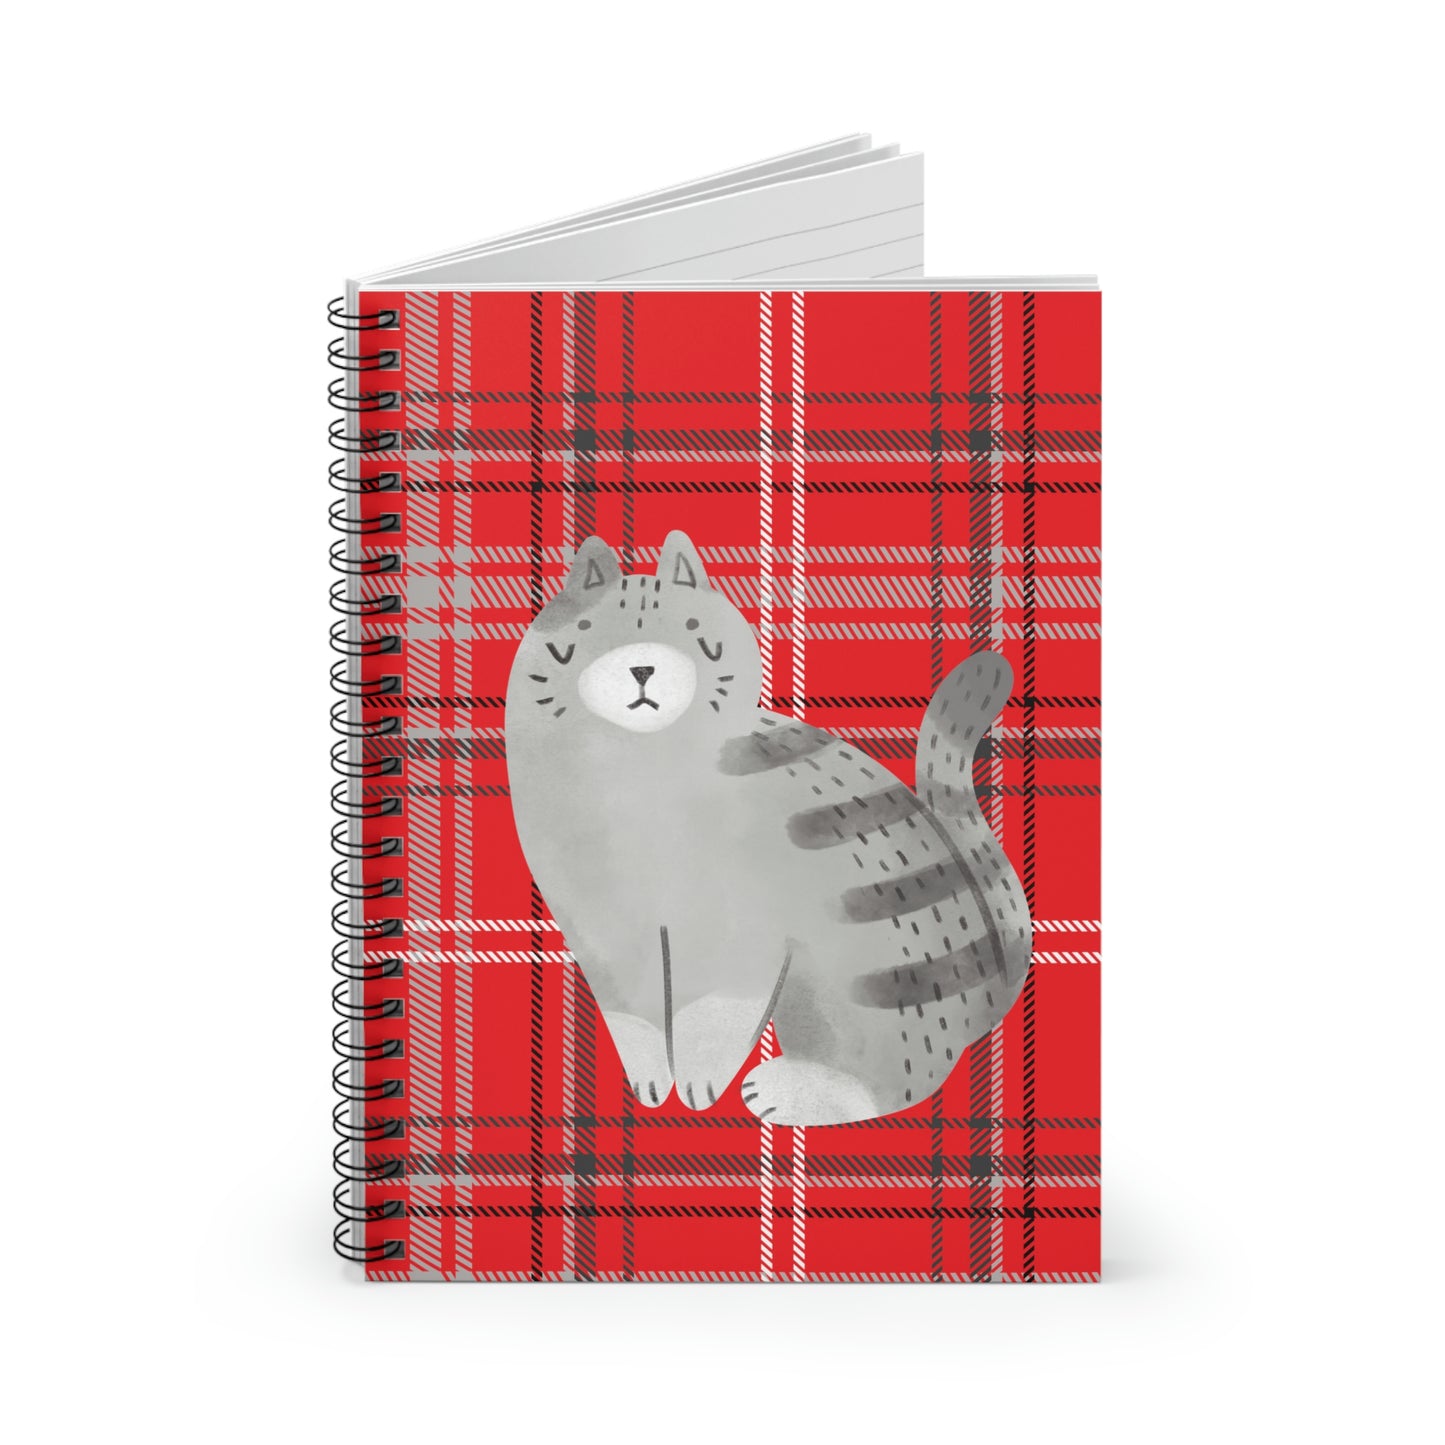 Red Plaid Grey Chubby Cat design Spiral Notebook - Ruled Line